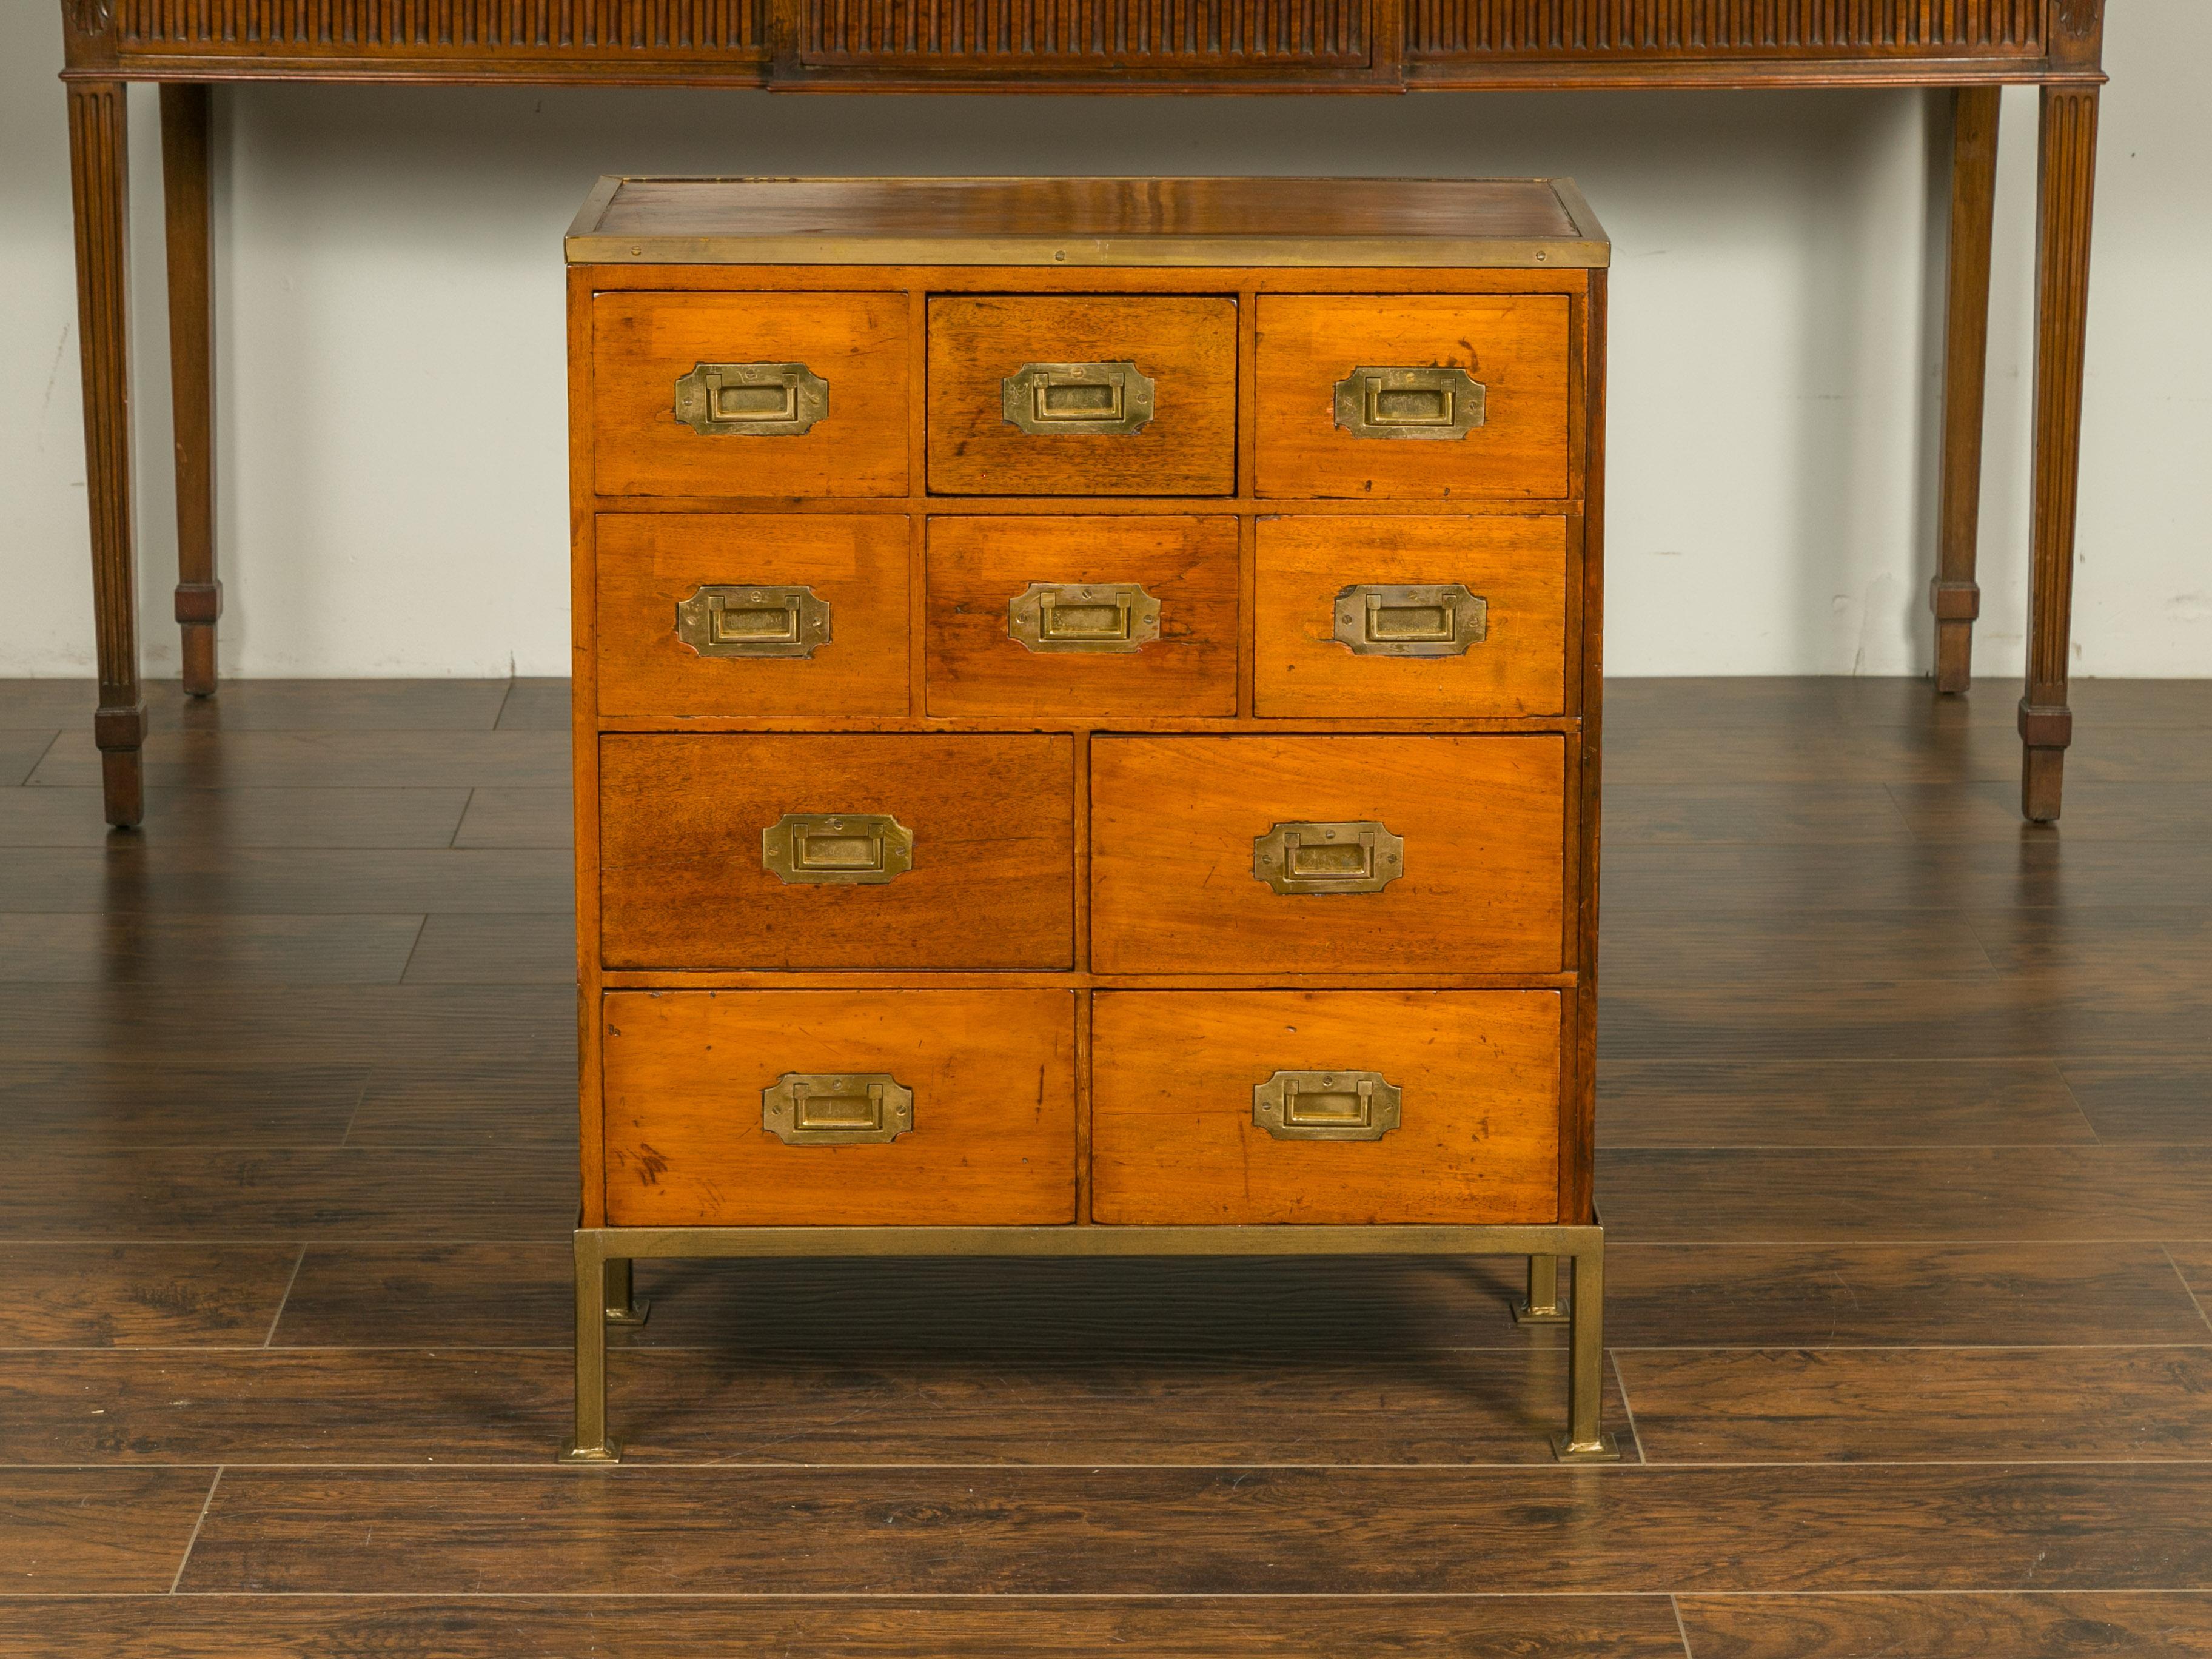 An English mahogany and pine Campaign chest from the mid-19th century, with brass accents and new custom gilt iron stand. Created in England during the second quarter of the 19th century, this Campaign chest features a rectangular top surrounded by